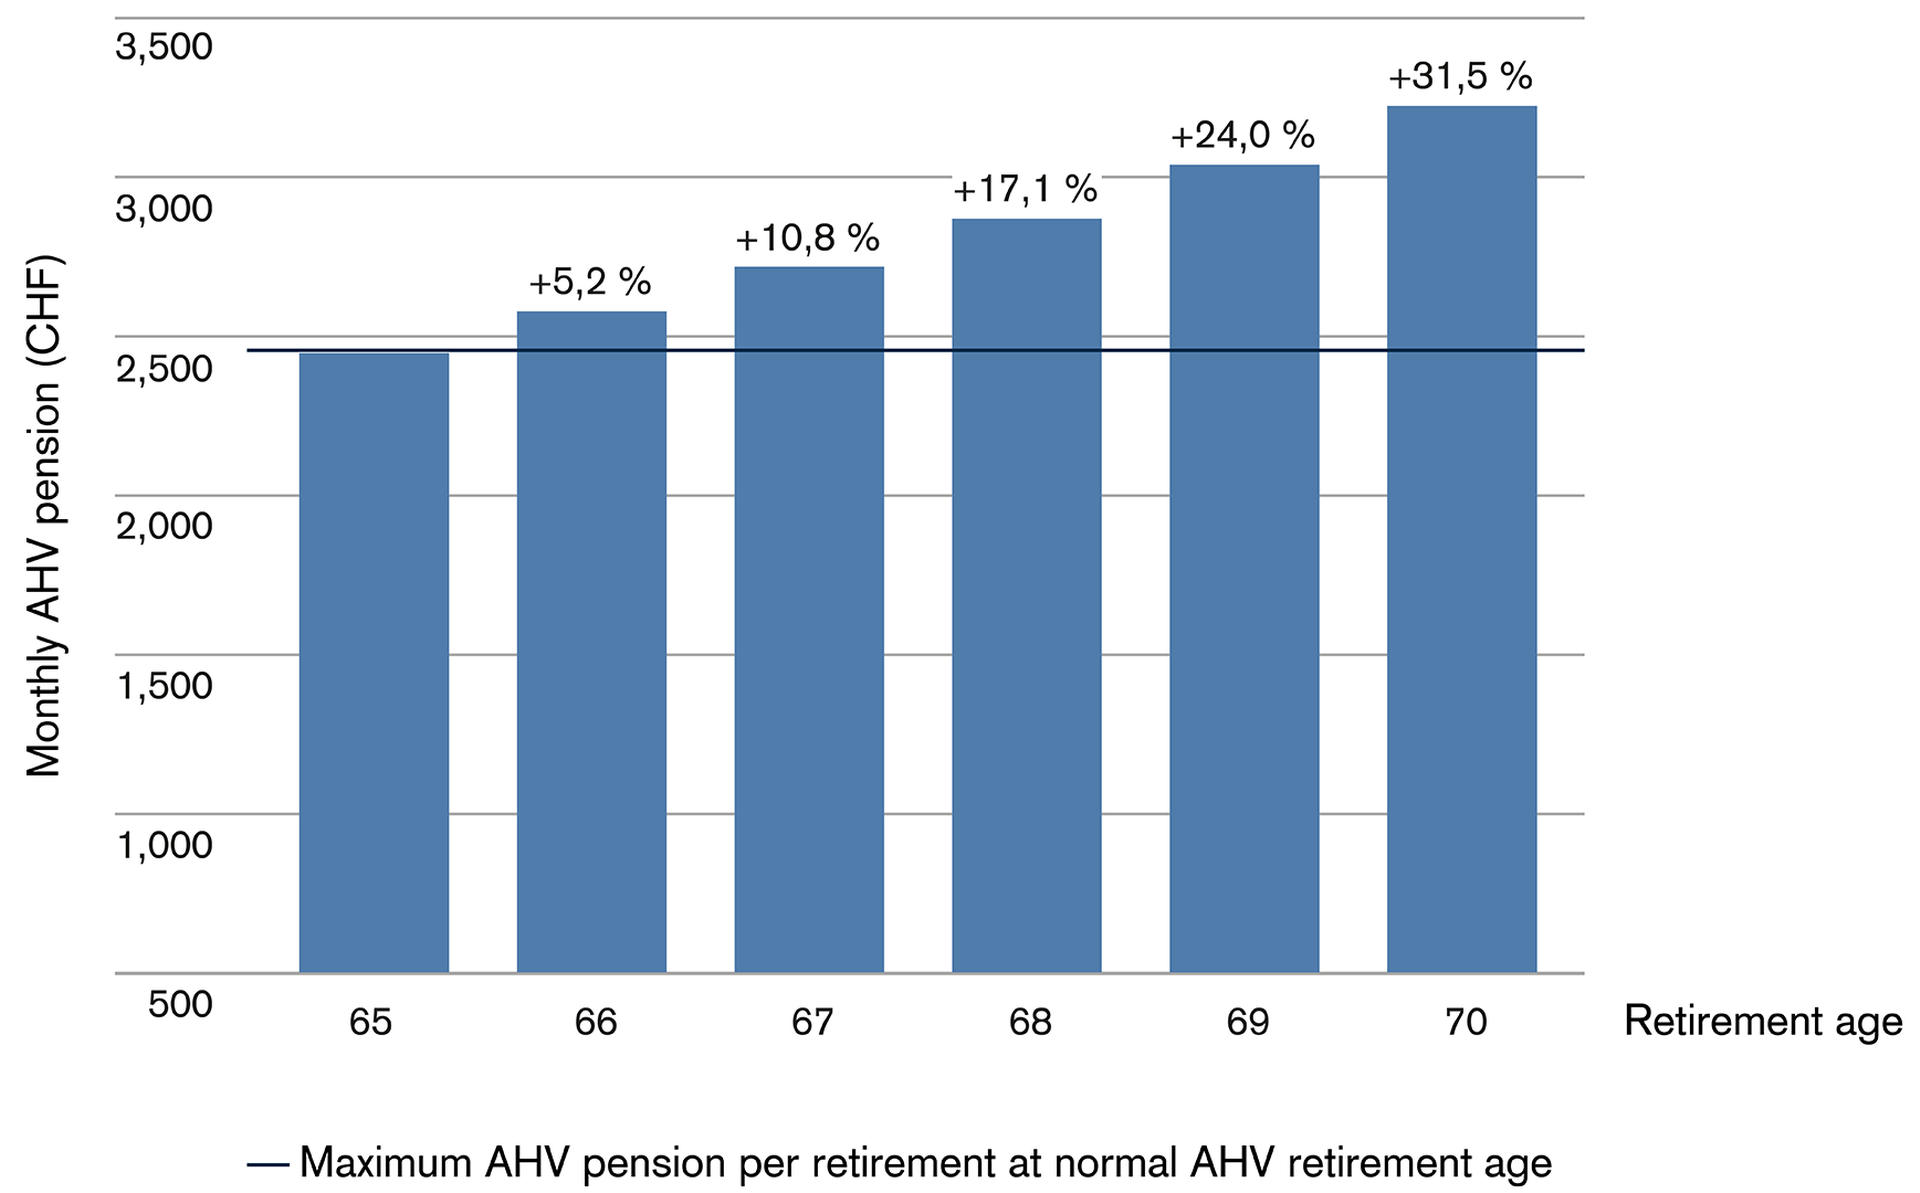 Deferring your AHV pension: How the pension increases